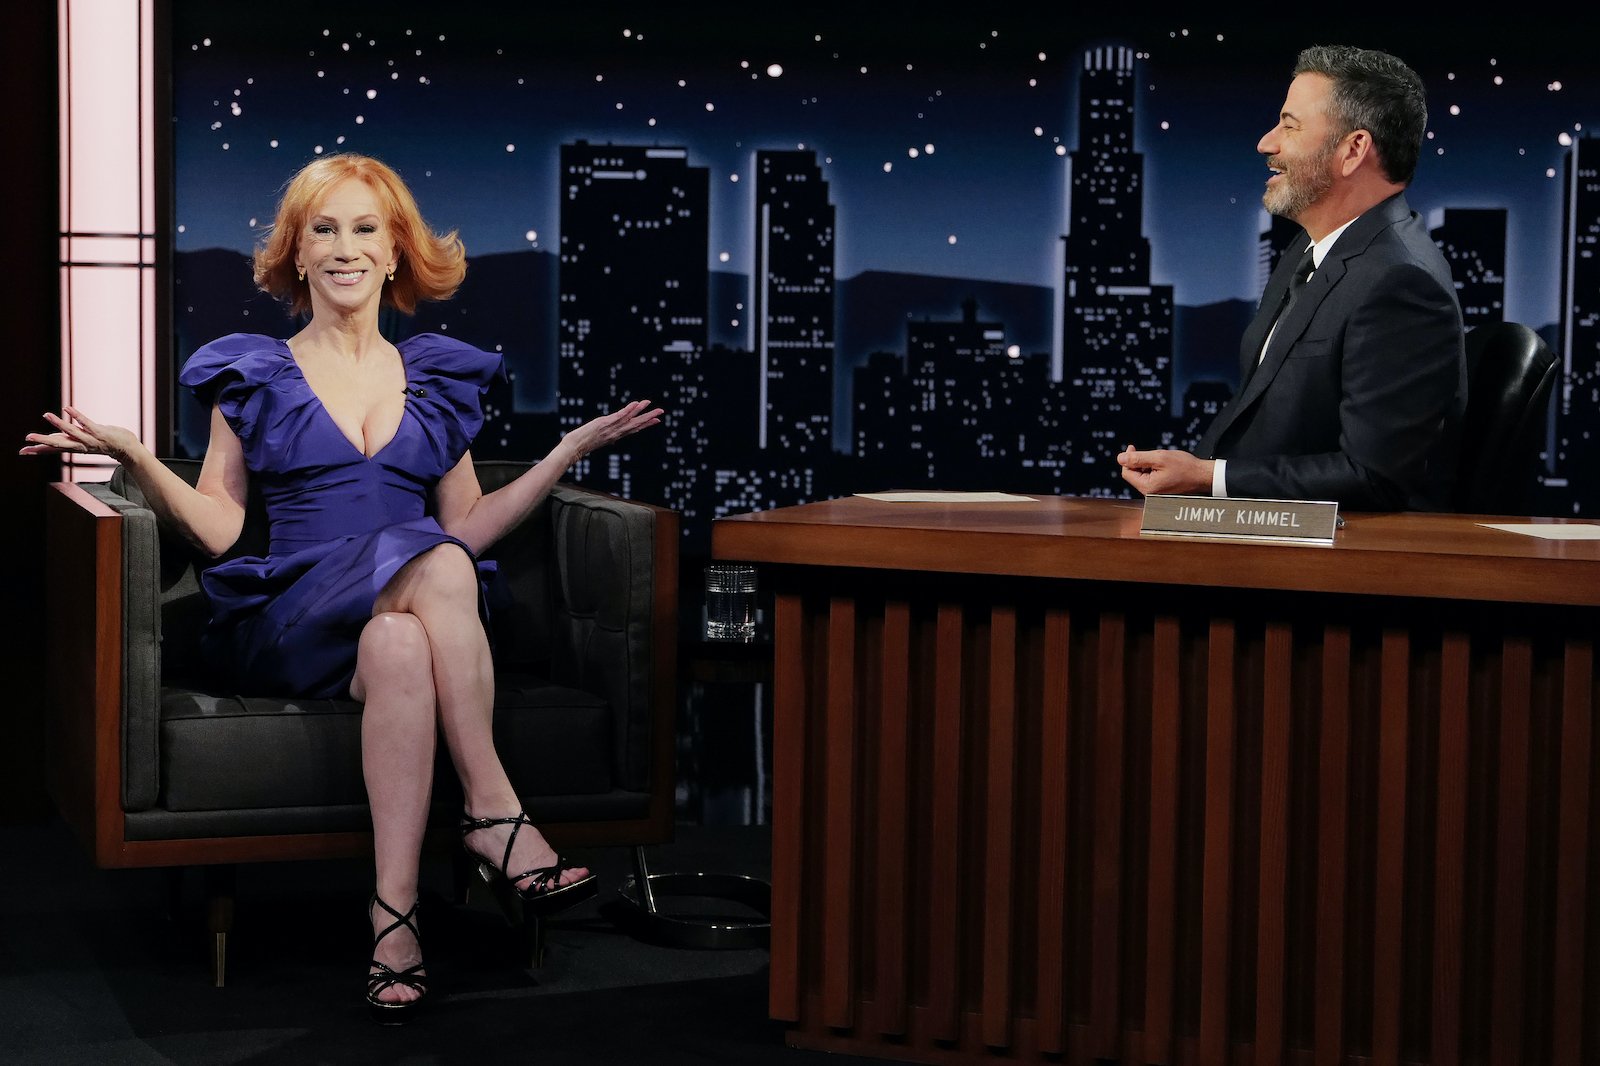 Kathy Griffin sits in front of Jimmy Kimmel, during an appearance on his show